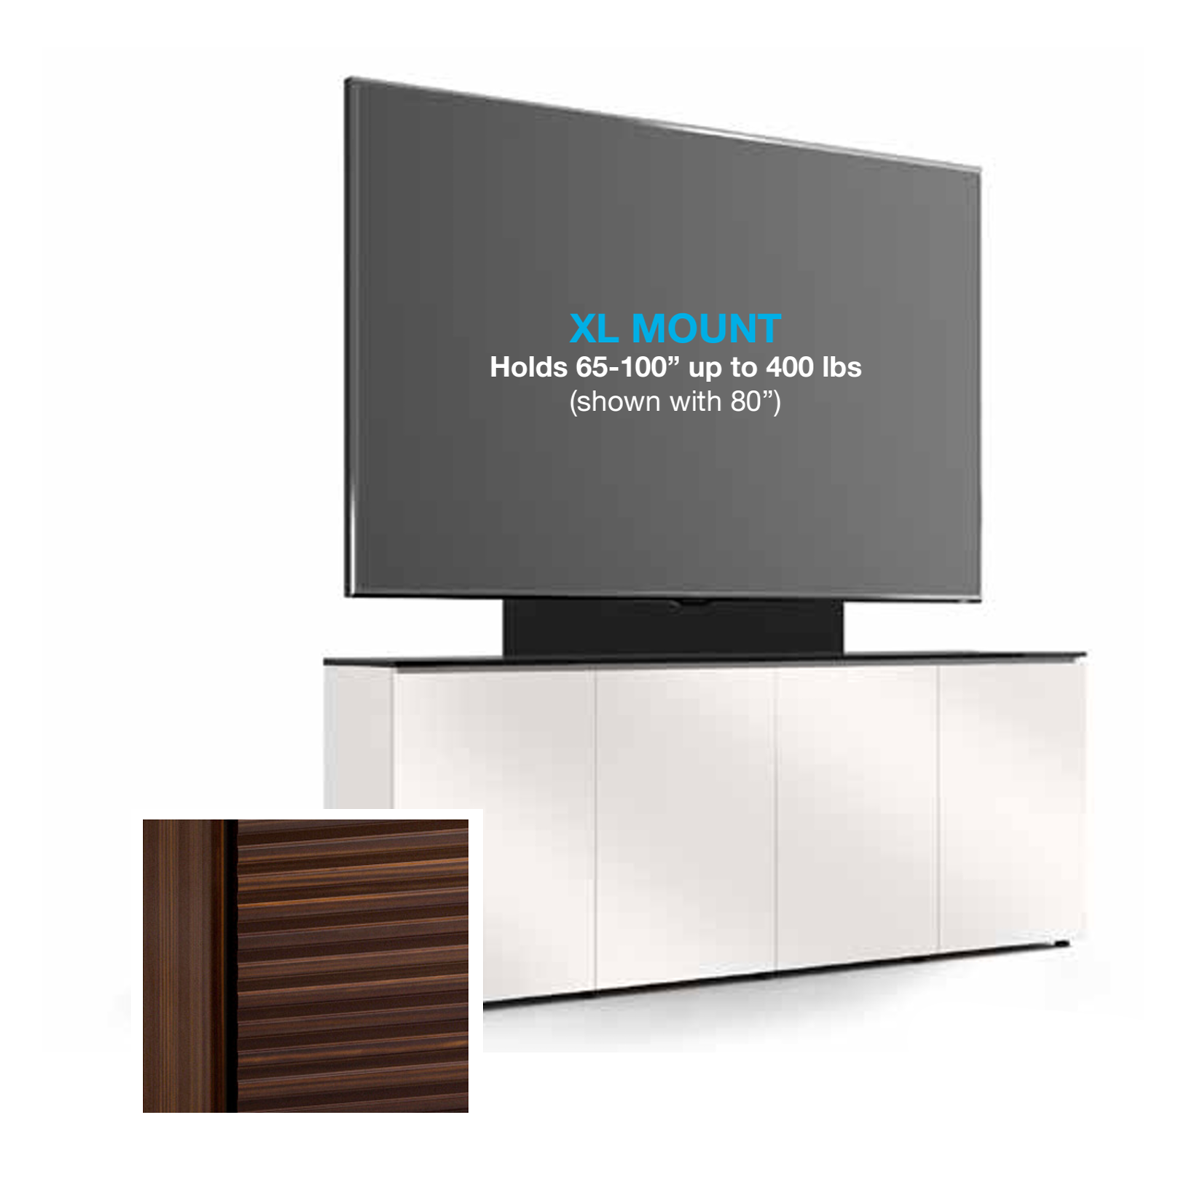 D1/347AMXL/ZU/OB 4 Bay, Single XL Monitor Low-Profile, Wall Cabinet, Zurich/Linear Texture- Opium Brown